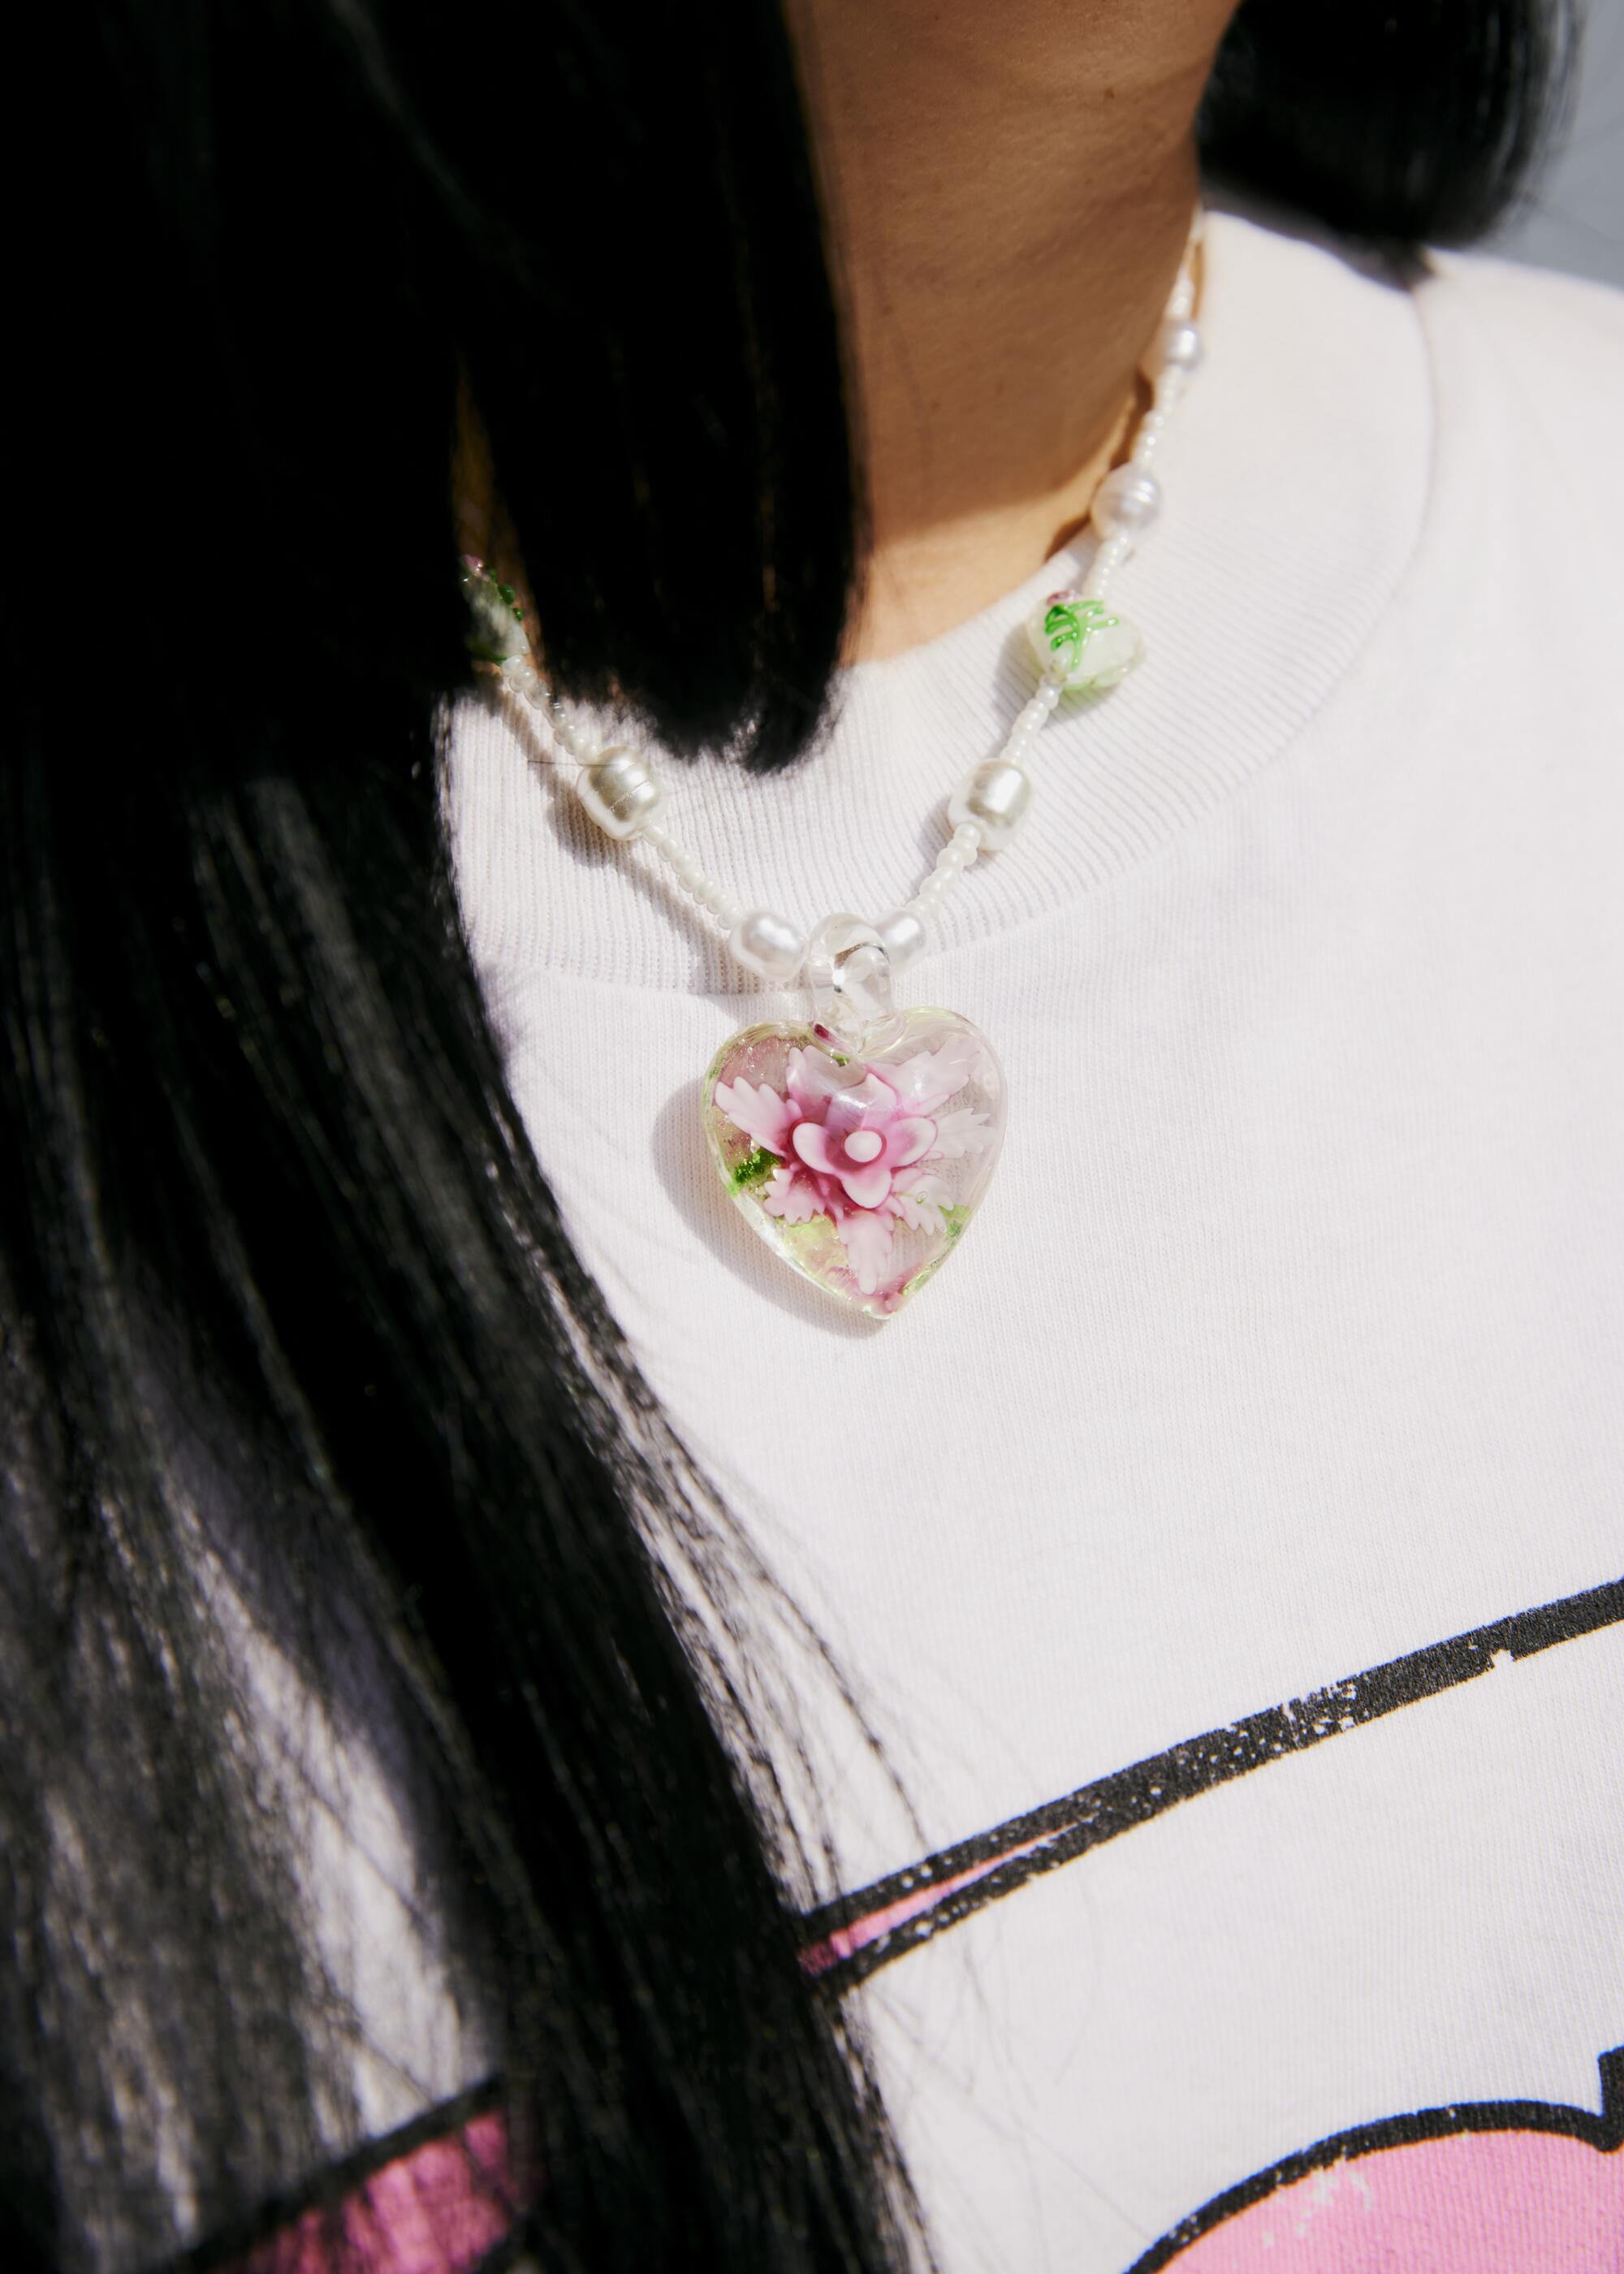 Detail of a heart-shaped necklace on a white sweater.